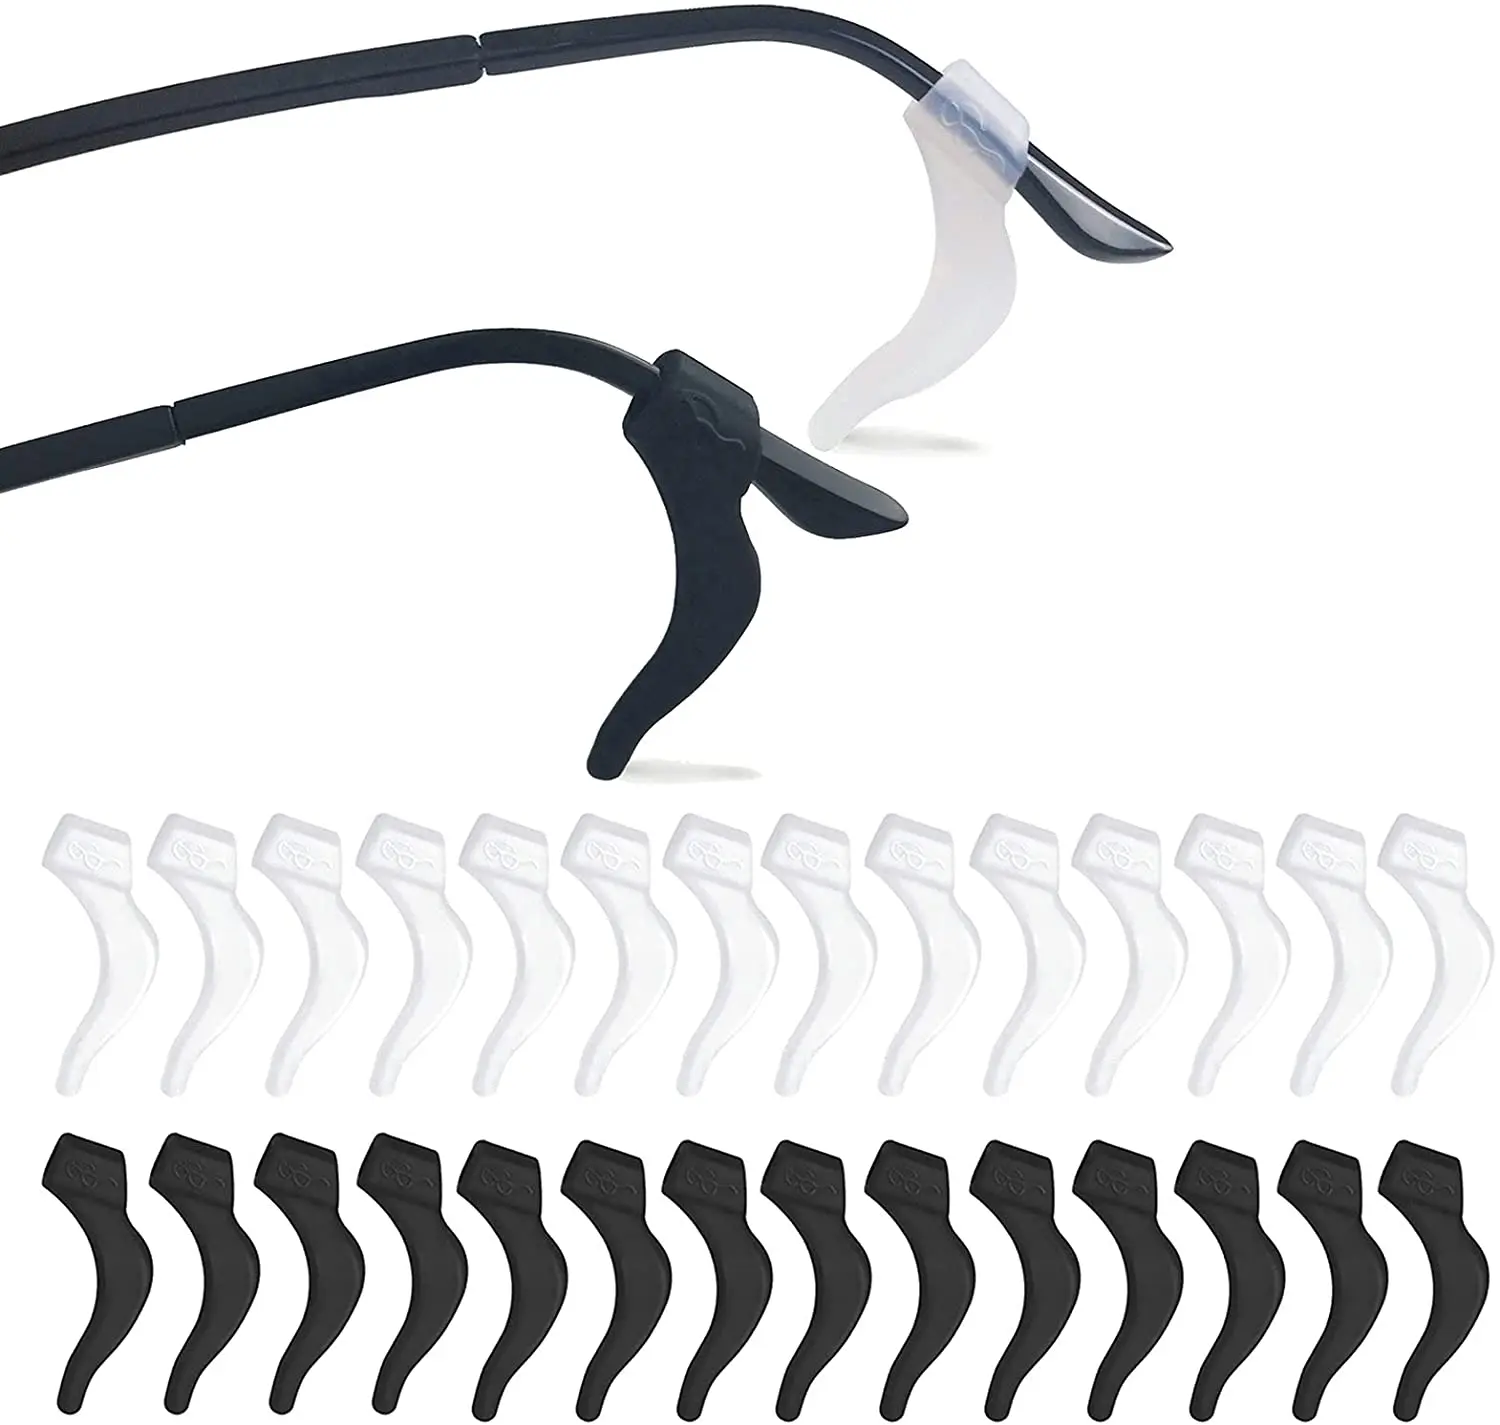 10-pairs-top-quality-silicone-anti-slip-holder-for-glasses-accessories-white-black-ear-hook-sports-eyeglass-temple-tip-stoppers